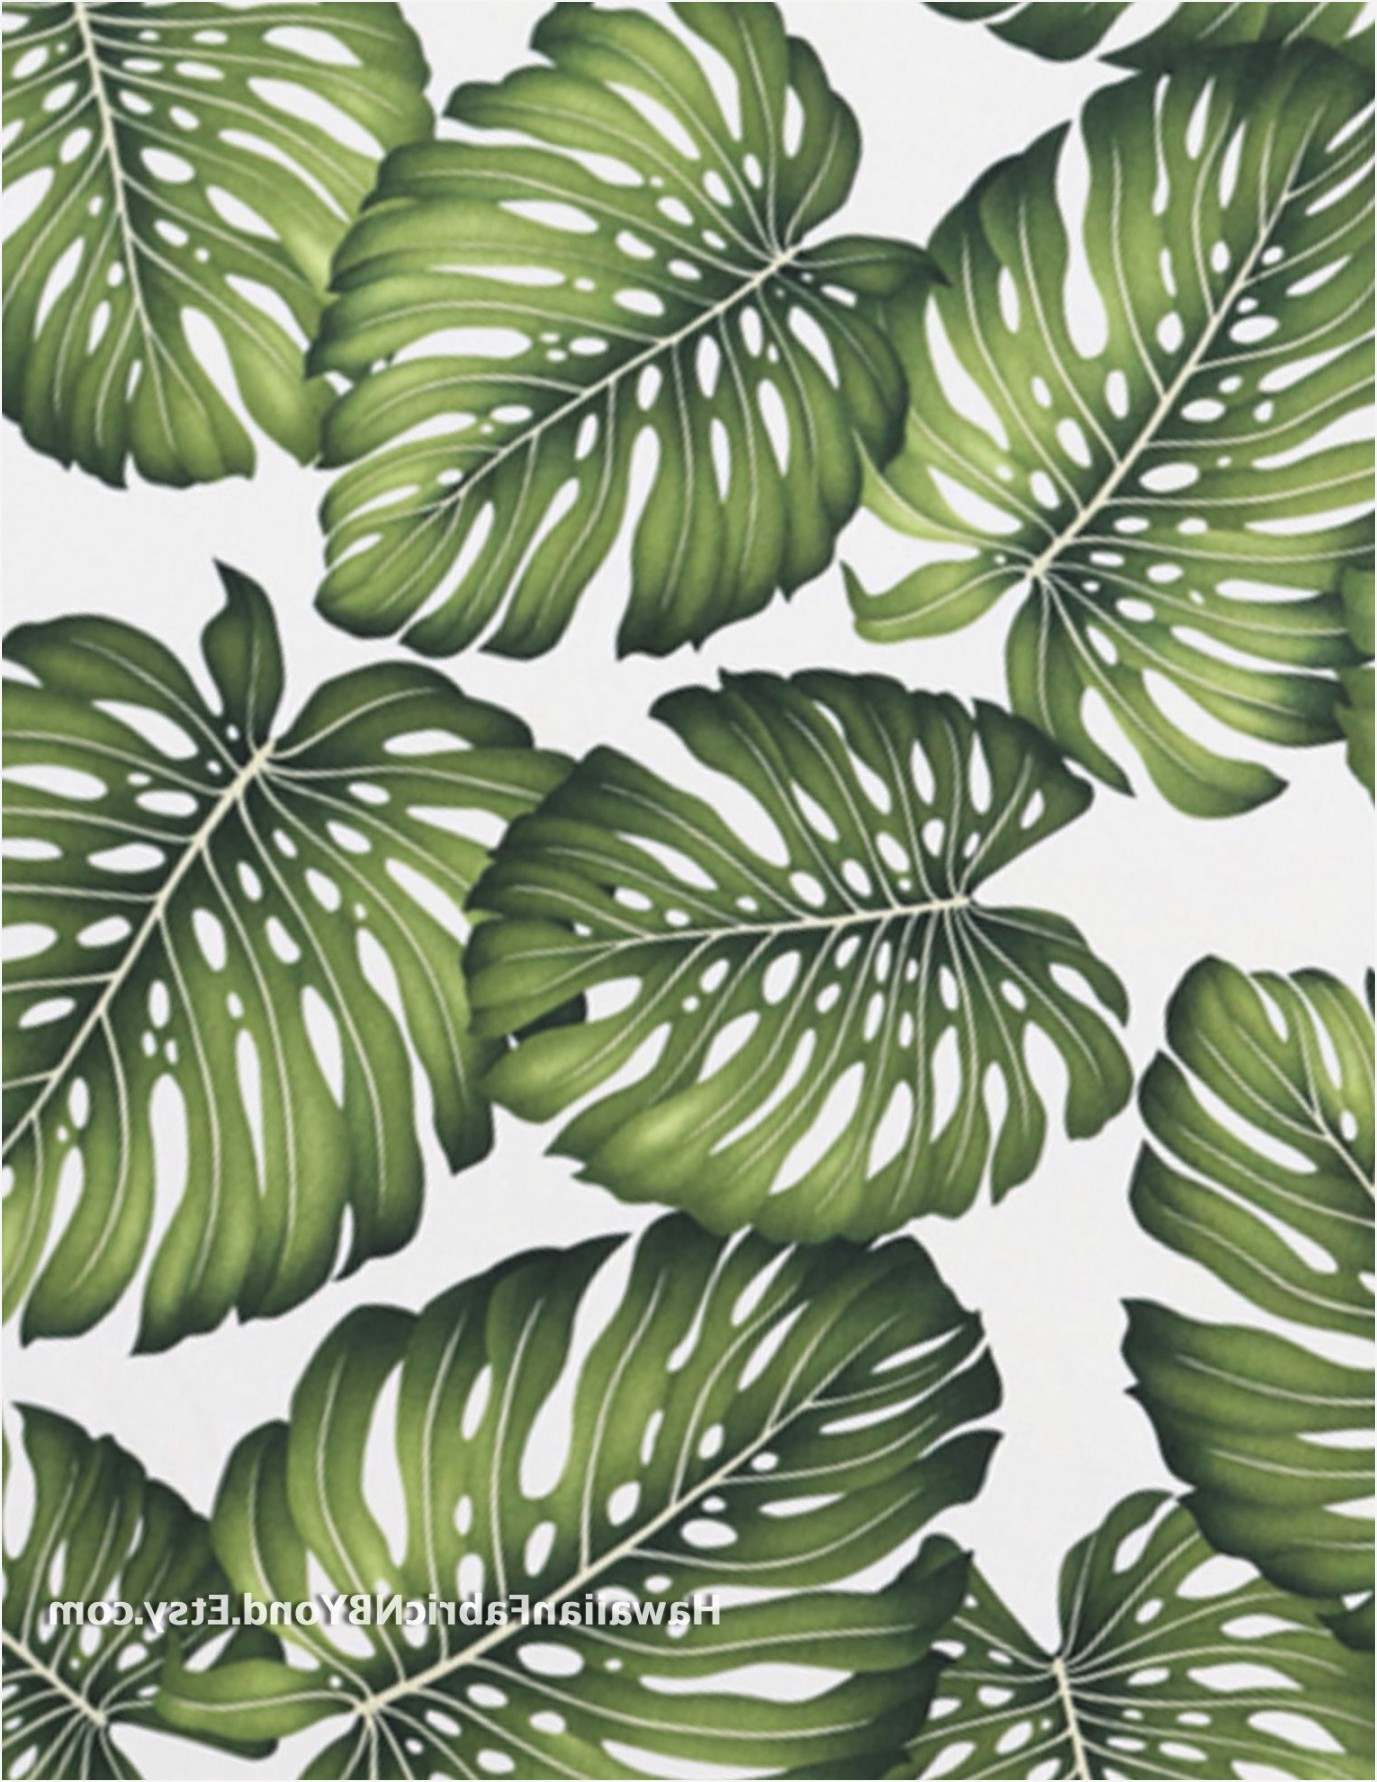 23 attractive How It's Made Hardwood Flooring 2024 free download how itamp039s made hardwood flooring of tropical upholstery fabric inspirational tropical leaf fabric print in tropical upholstery fabric inspirational tropical leaf fabric print of monstera